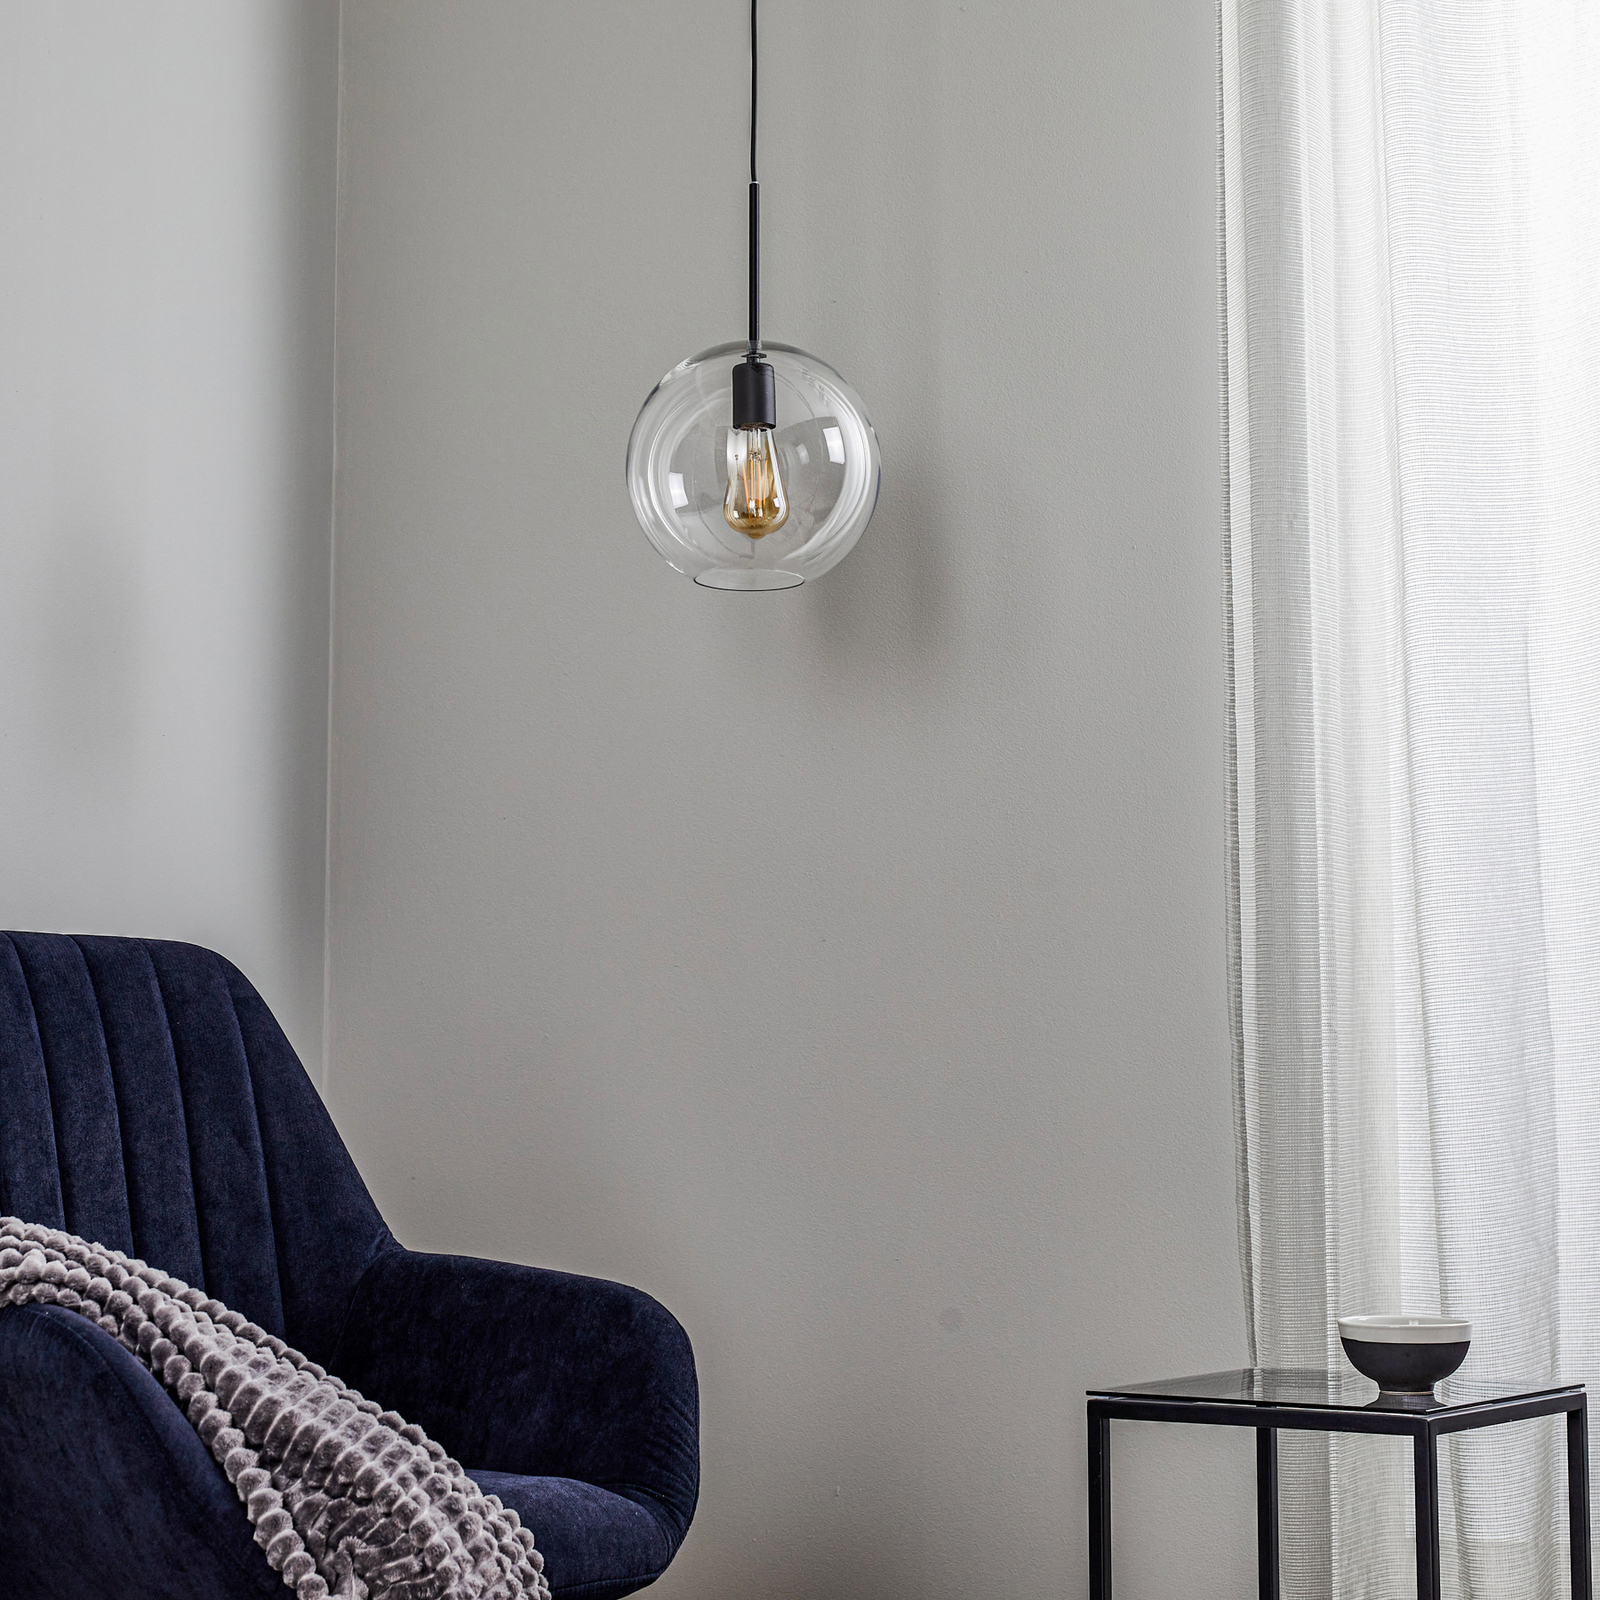 Sphere L pendant light with glass shade